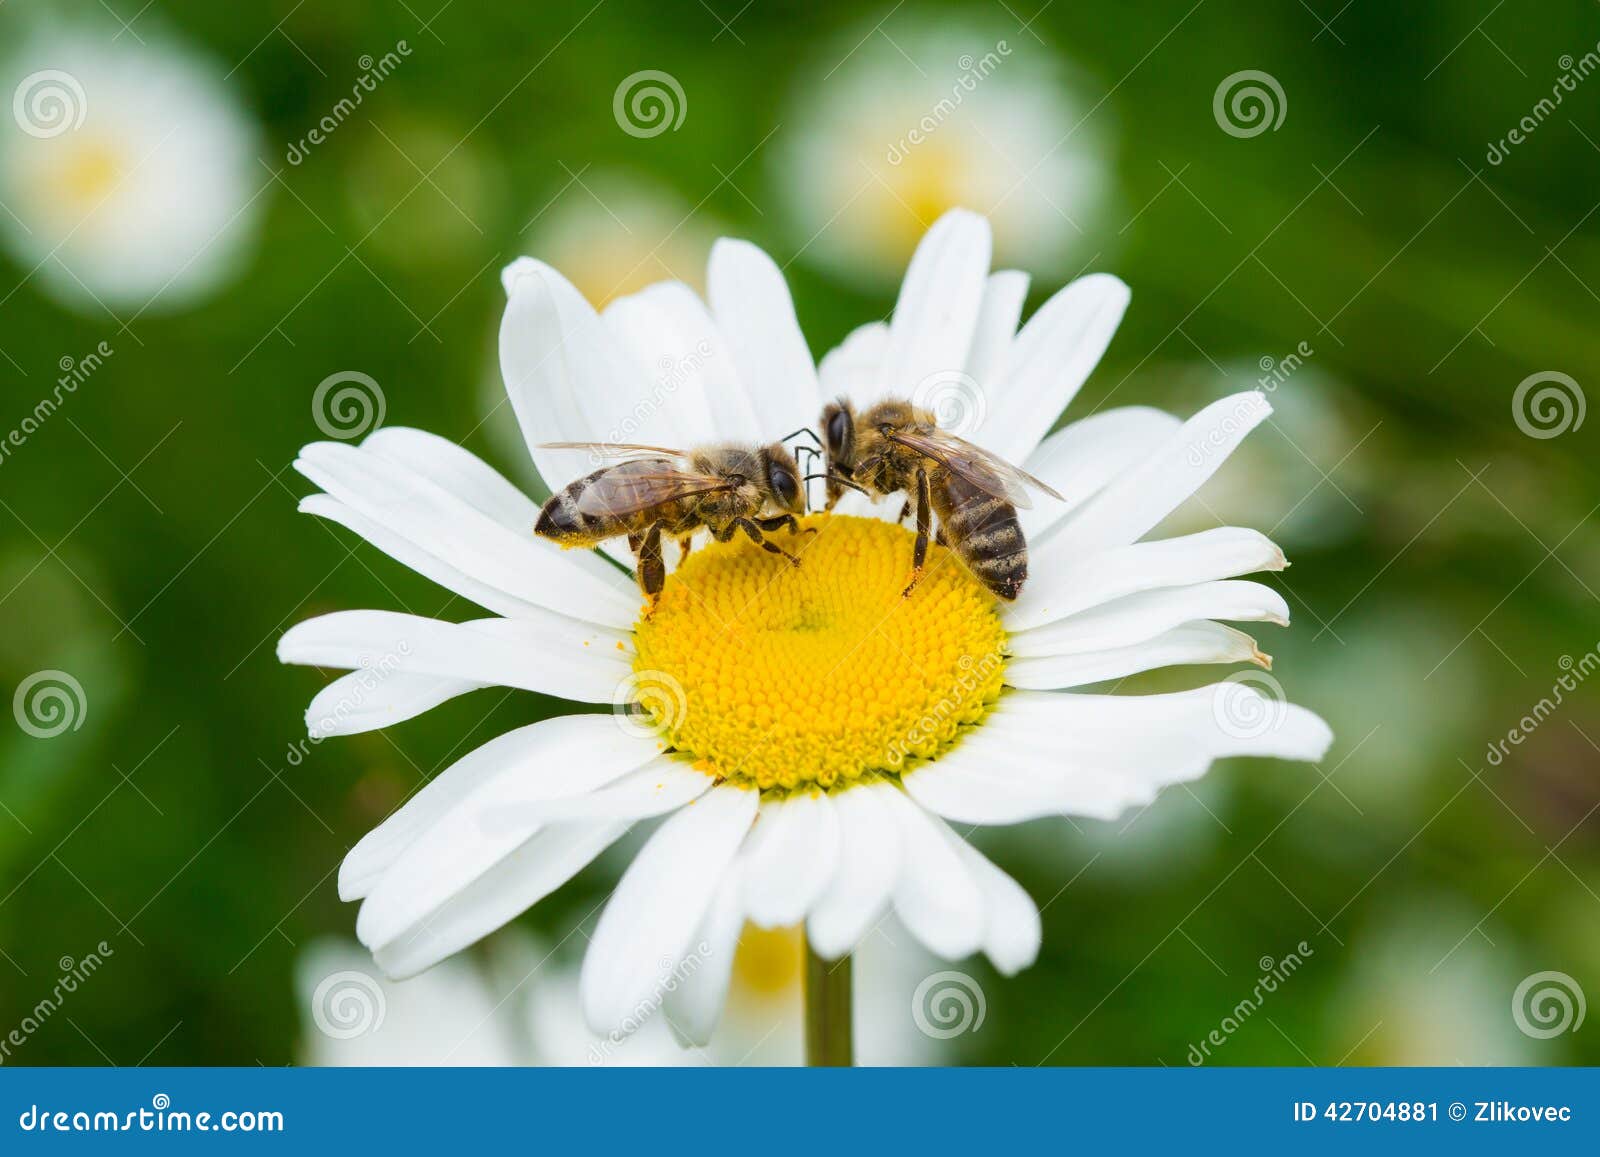 bees sucking nectar from a daisy flower